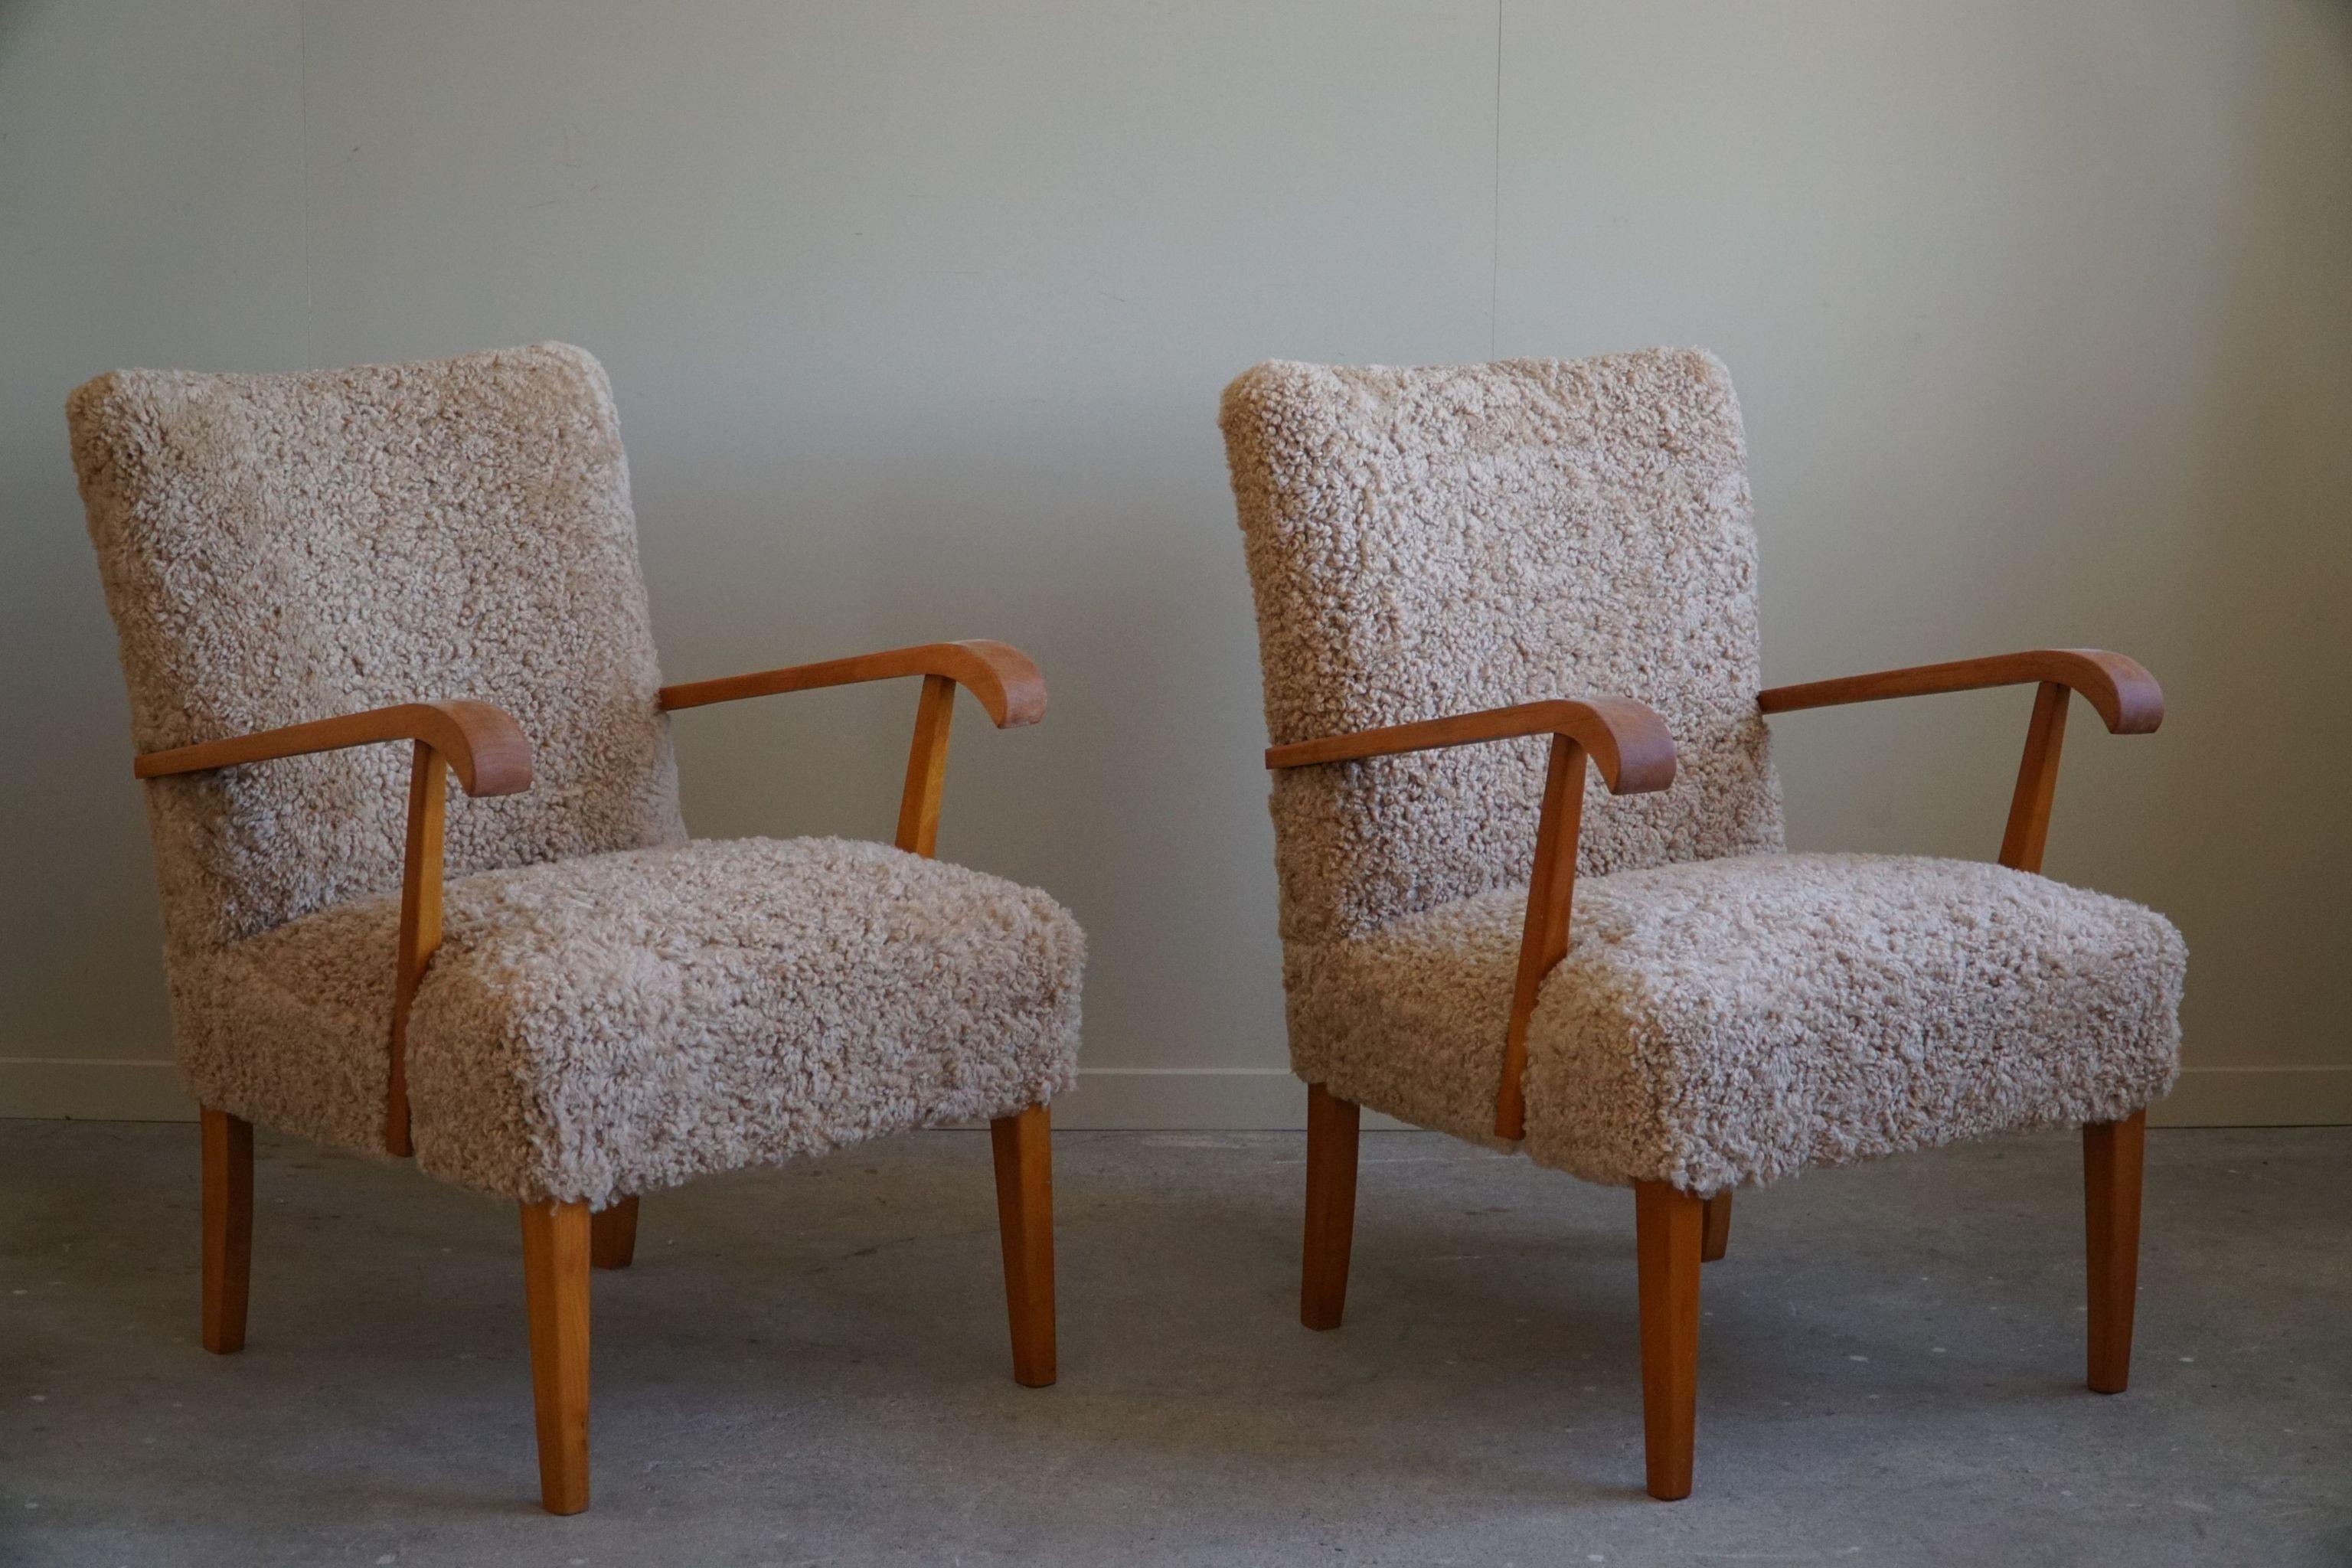 Pair of Danish Mid Century Modern Lounge Chairs in Beech & Lambswool, 1960s For Sale 5